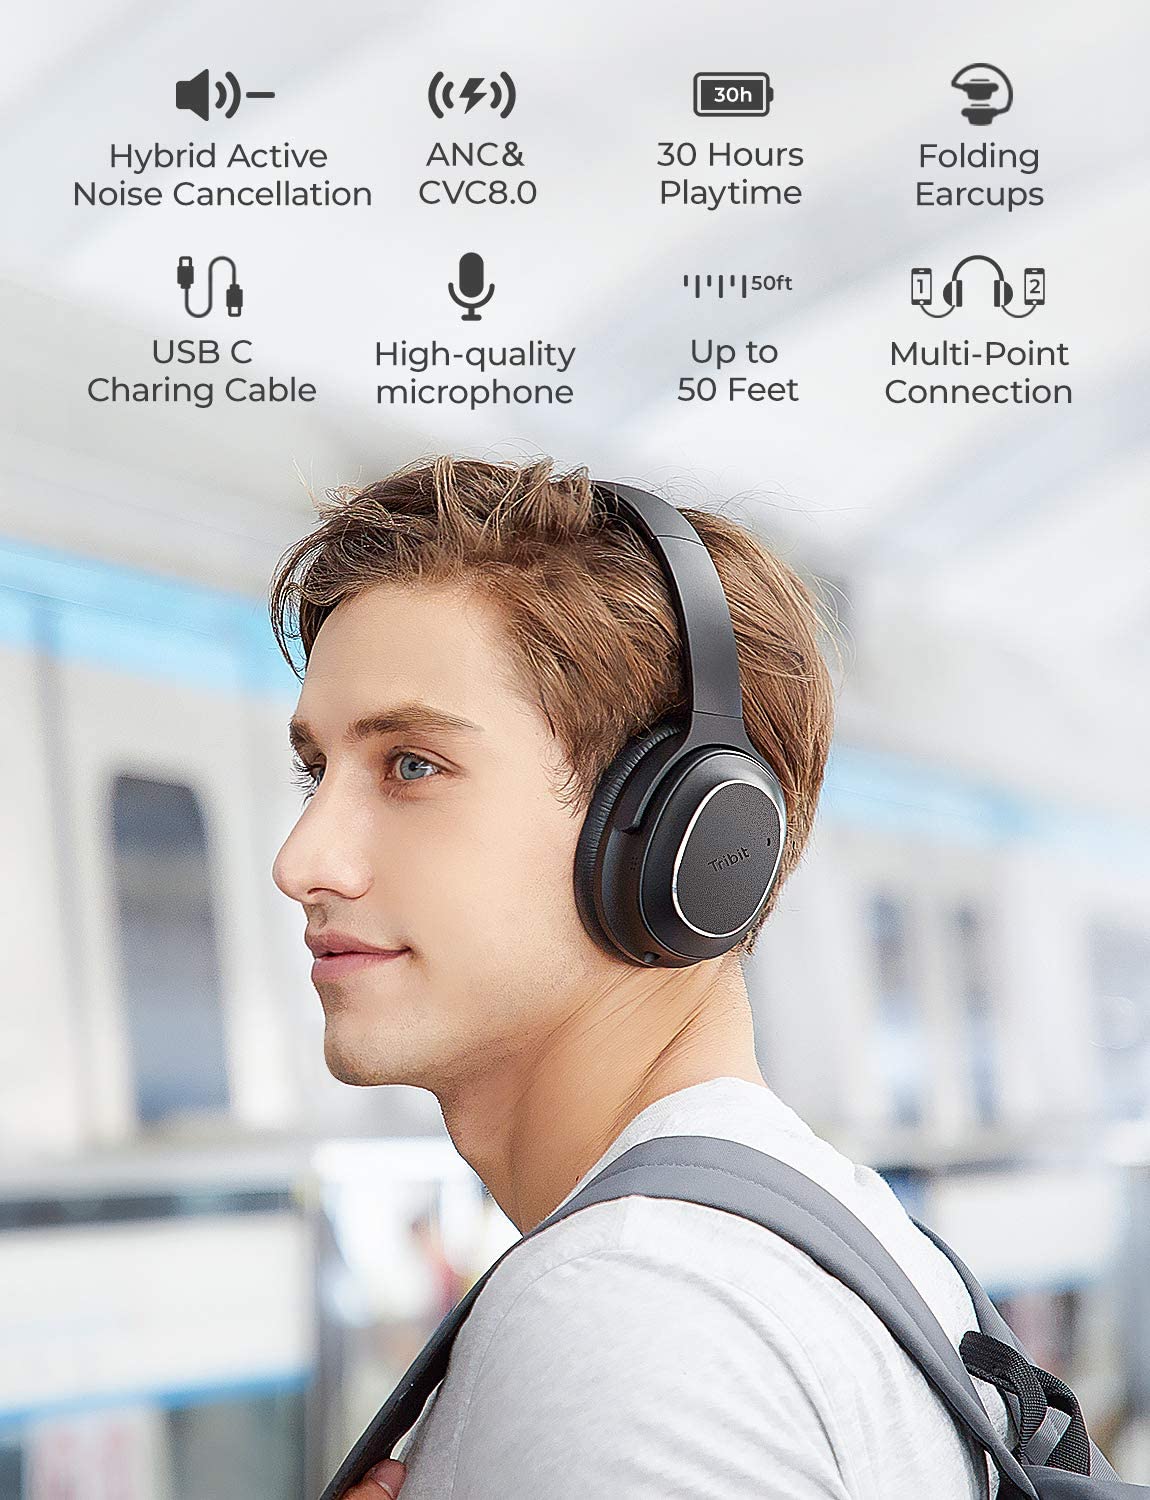 Tribit QuietPlus 72 Wireless Headphones Bluetooth 5.0 Foldable with 2 Microphones Noise Cancelling 500mAh 30h Playtime Rich Bass HiFi Sound BTH72